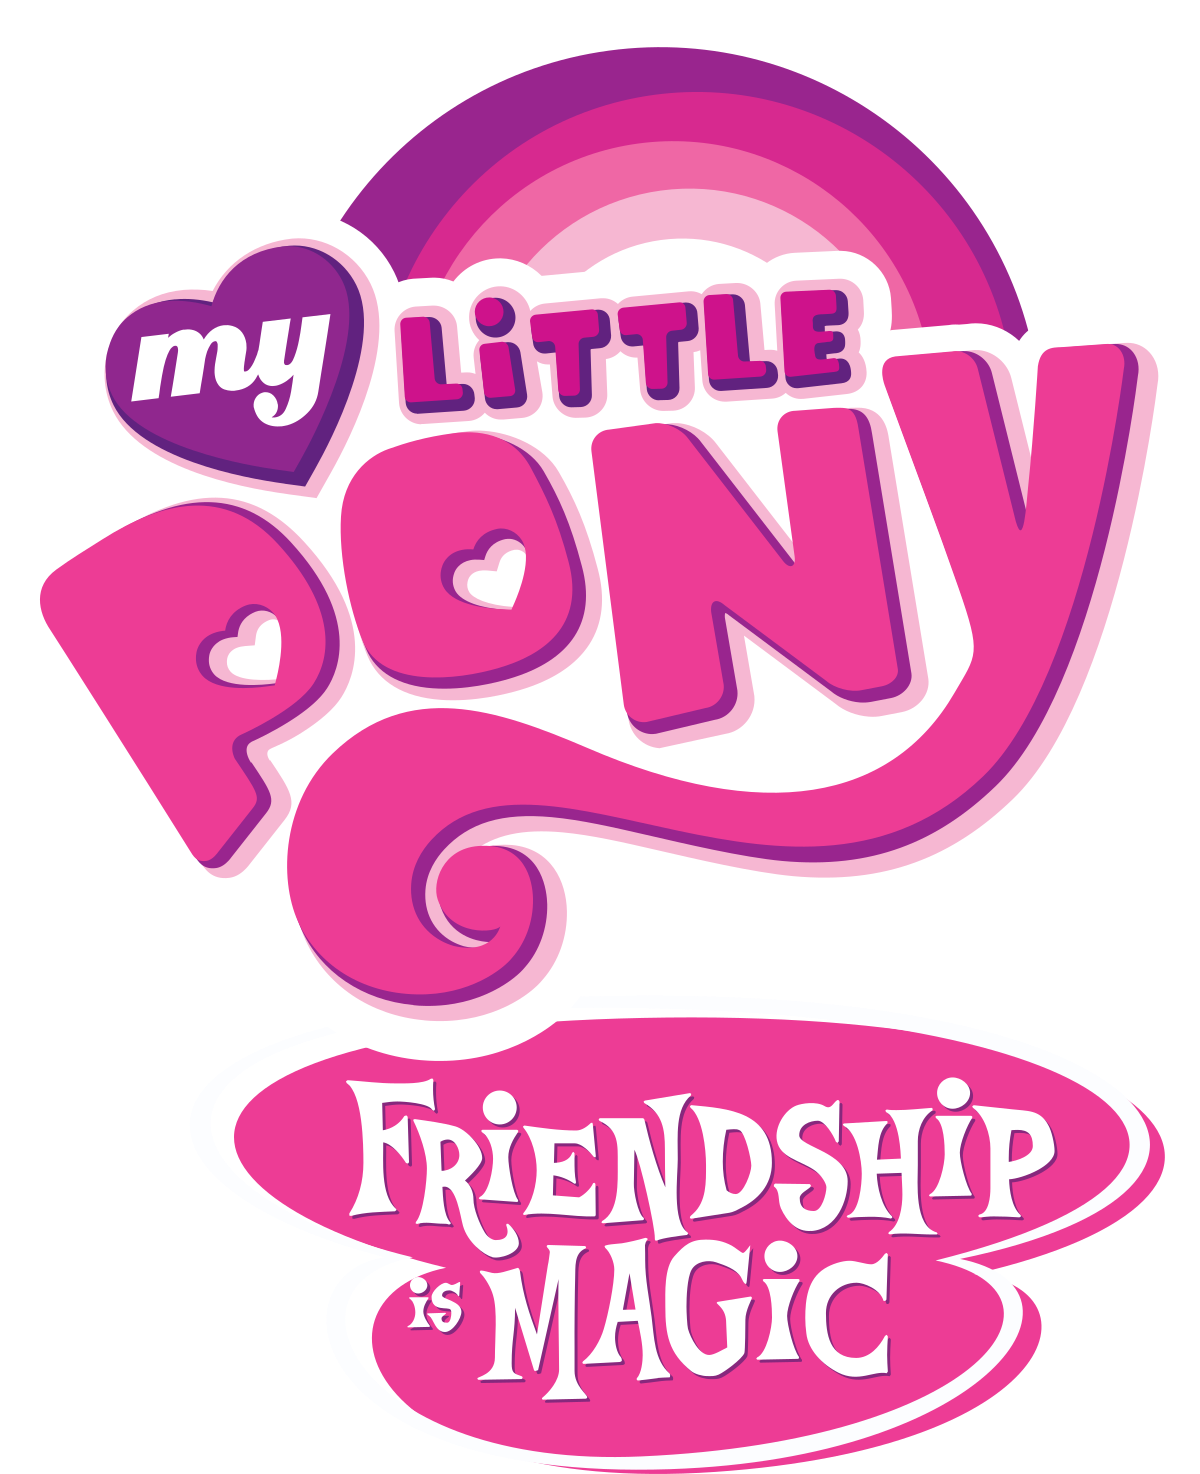 1200px-My_Little_Pony_Friendship_is_Magic_logo.svg.png